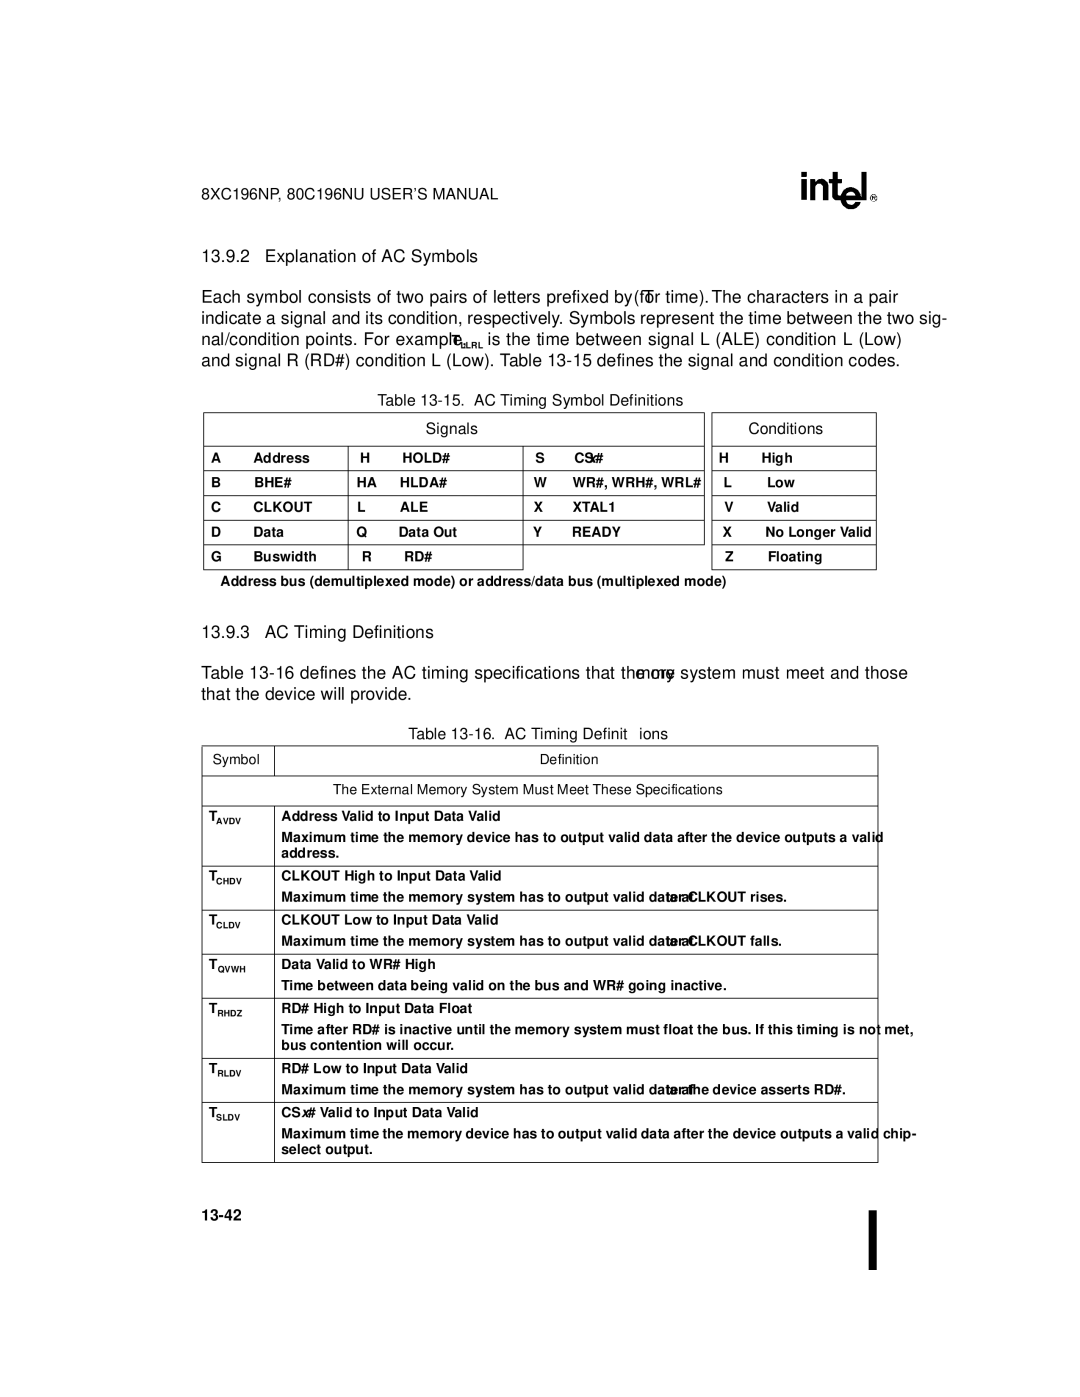 Intel Microcontroller Explanation of AC Symbols, AC Timing Definitions, AC Timing Symbol Definitions Signals, Conditions 